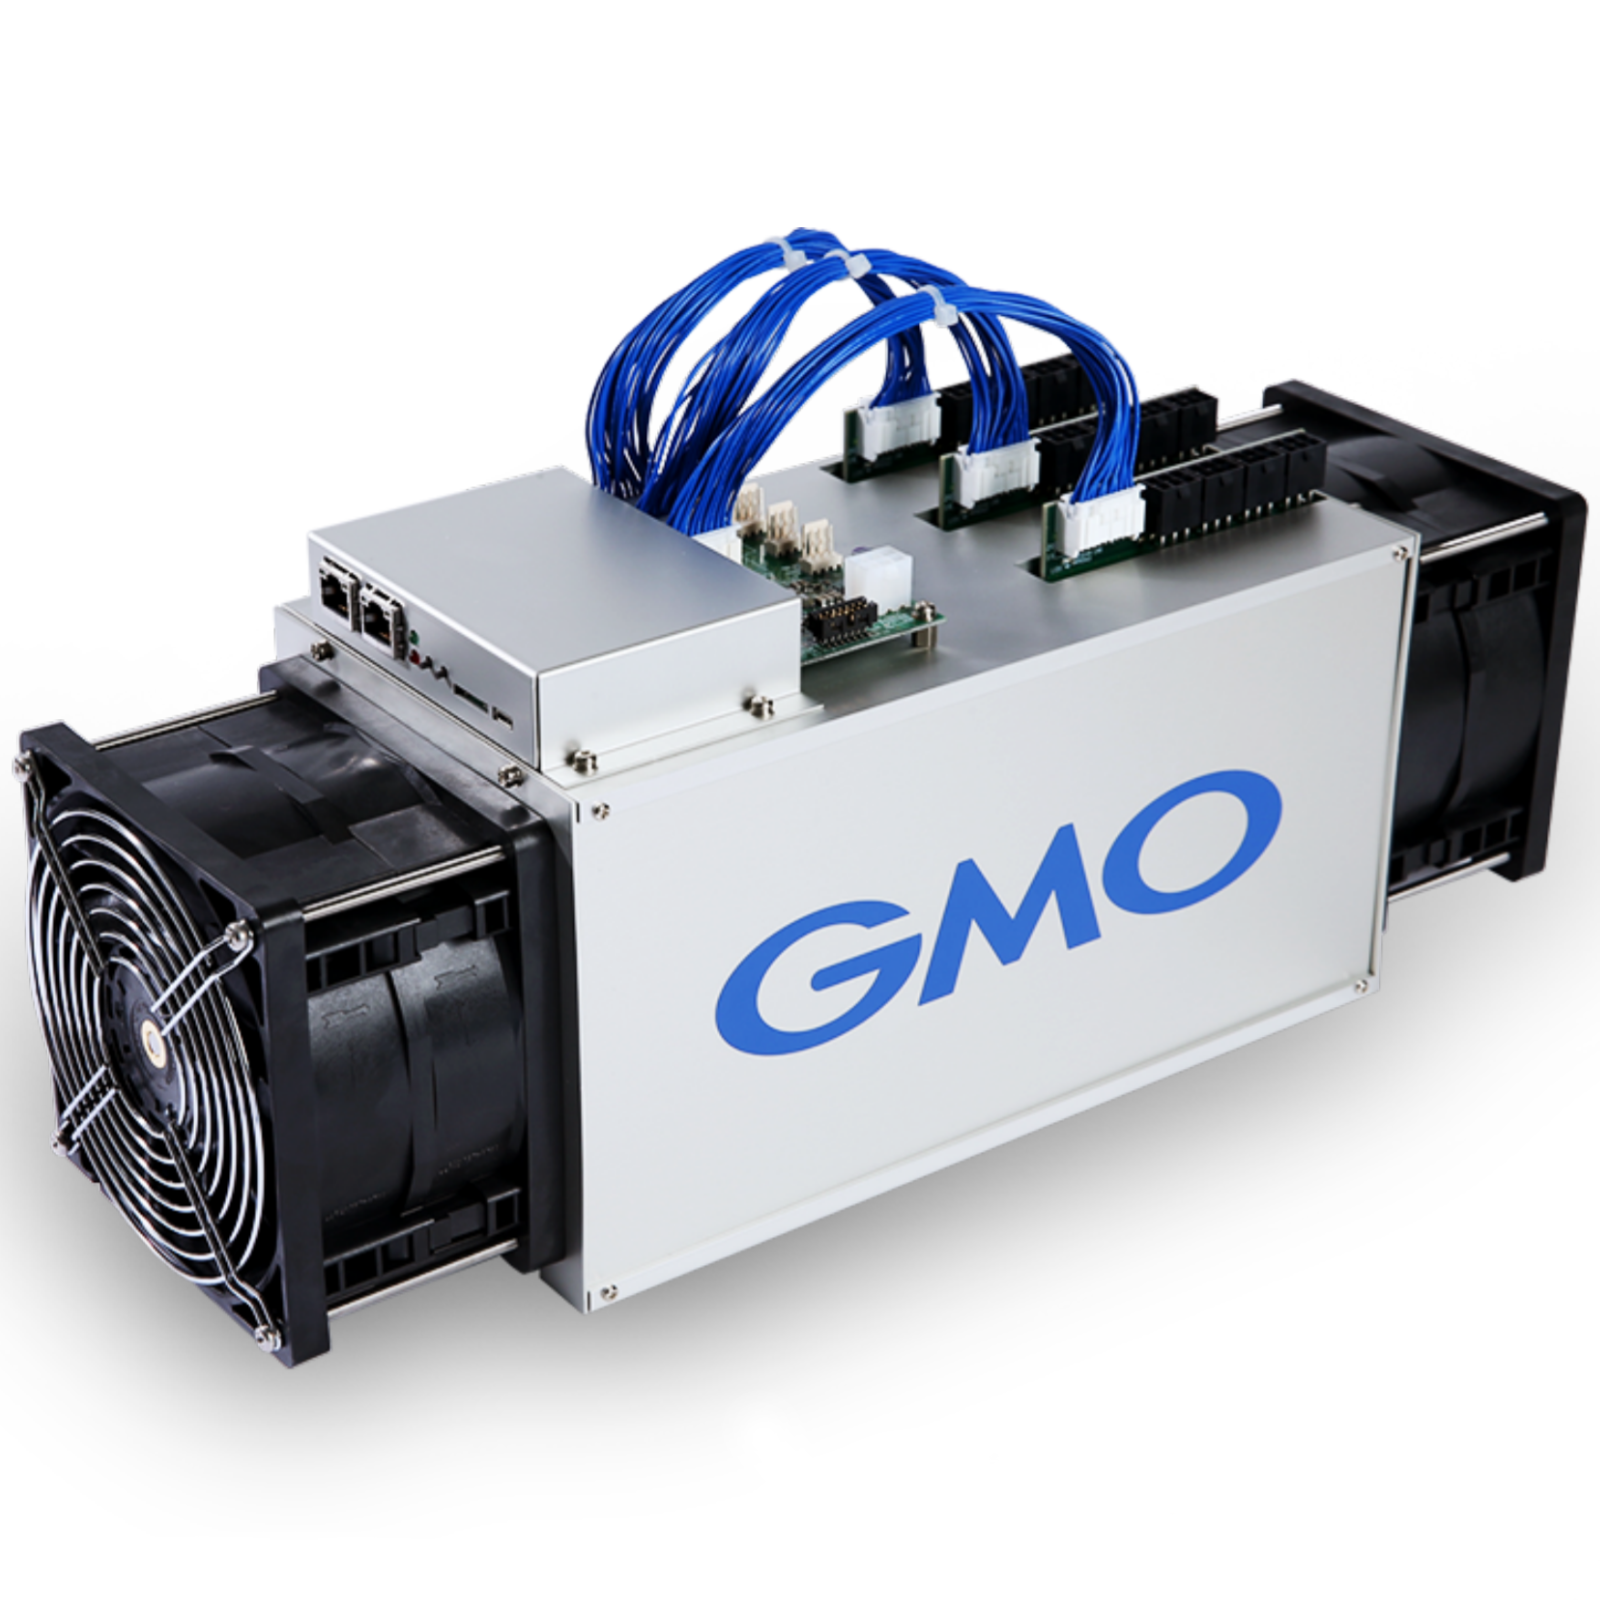 Japan’s Internet Giant GMO Launches New Upgraded 7nm Bitcoin Miner